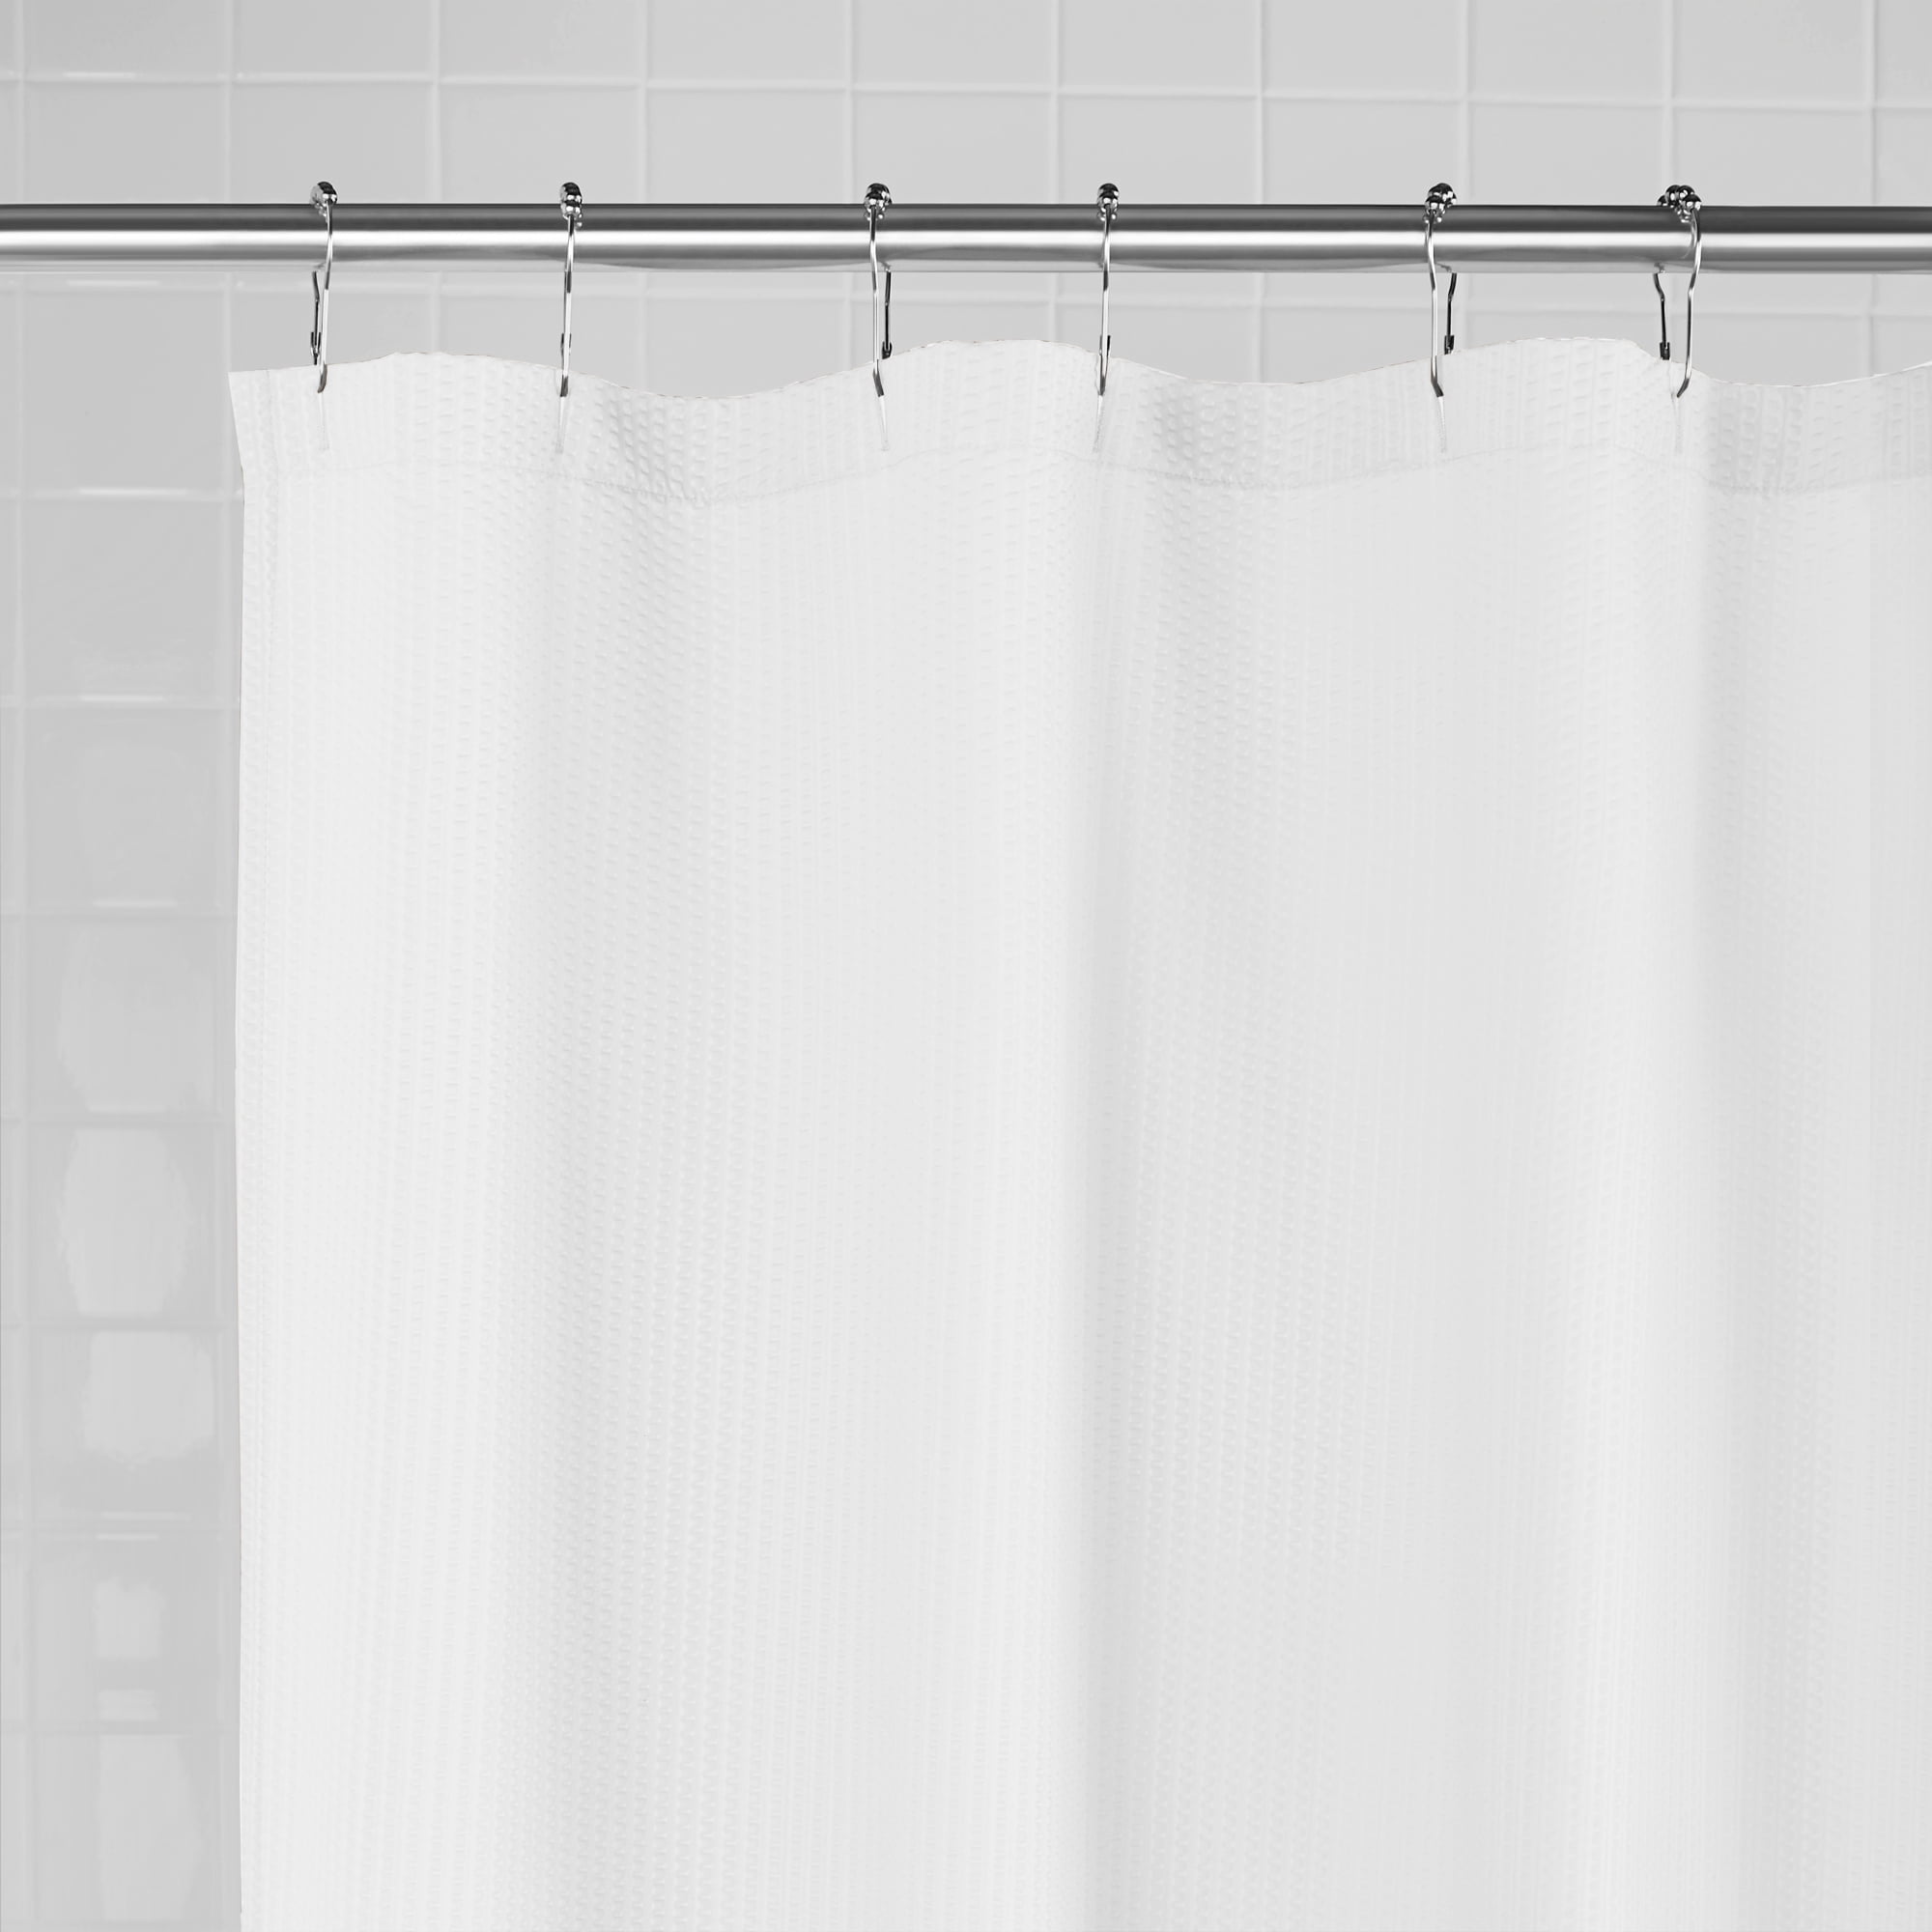 Other Side Waterproof Bathroom Polyester Shower Curtain Liner Water Resistant 